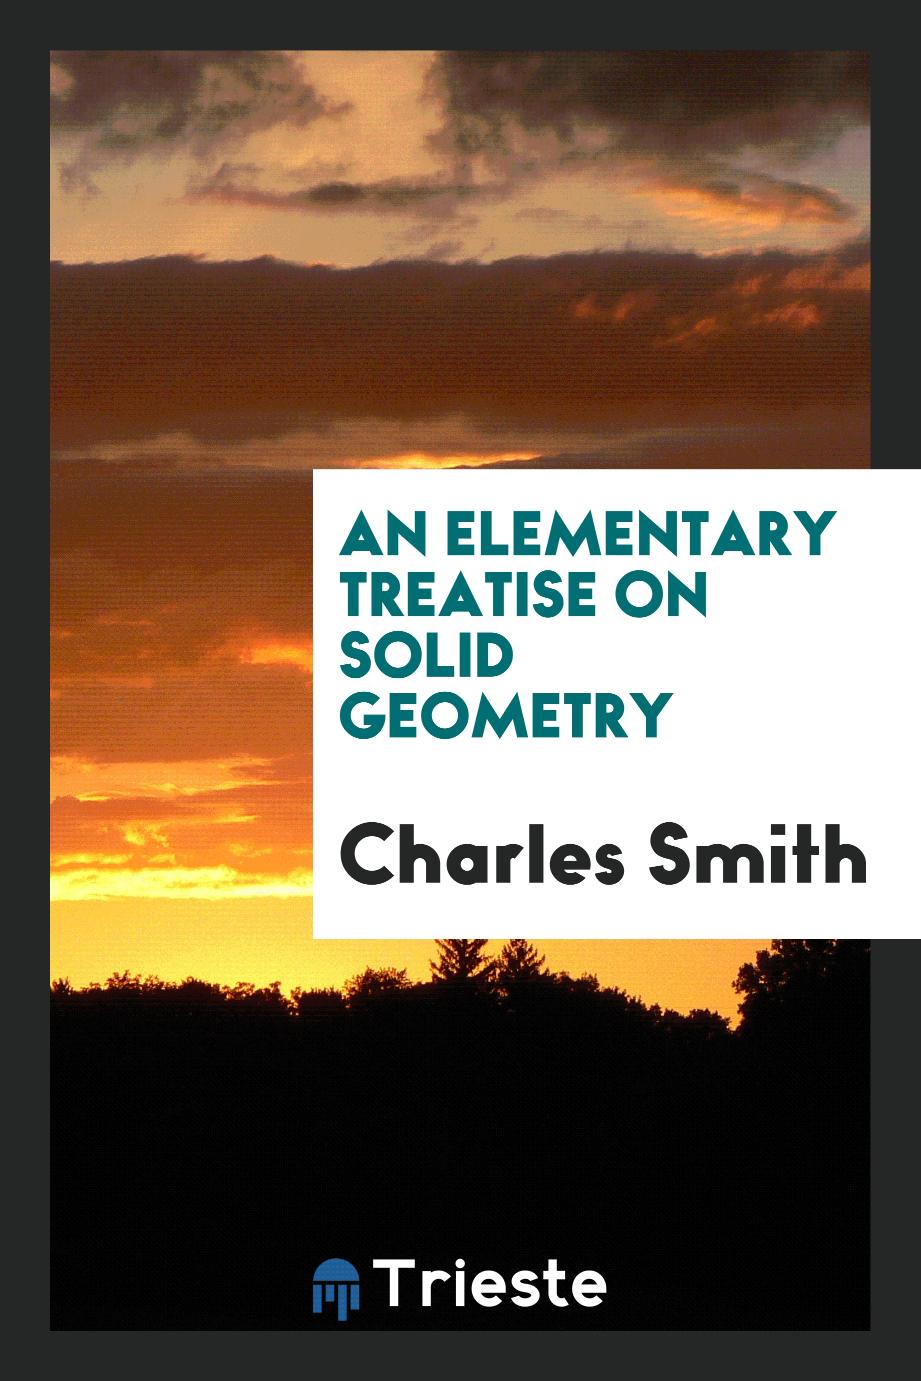 An elementary treatise on solid geometry